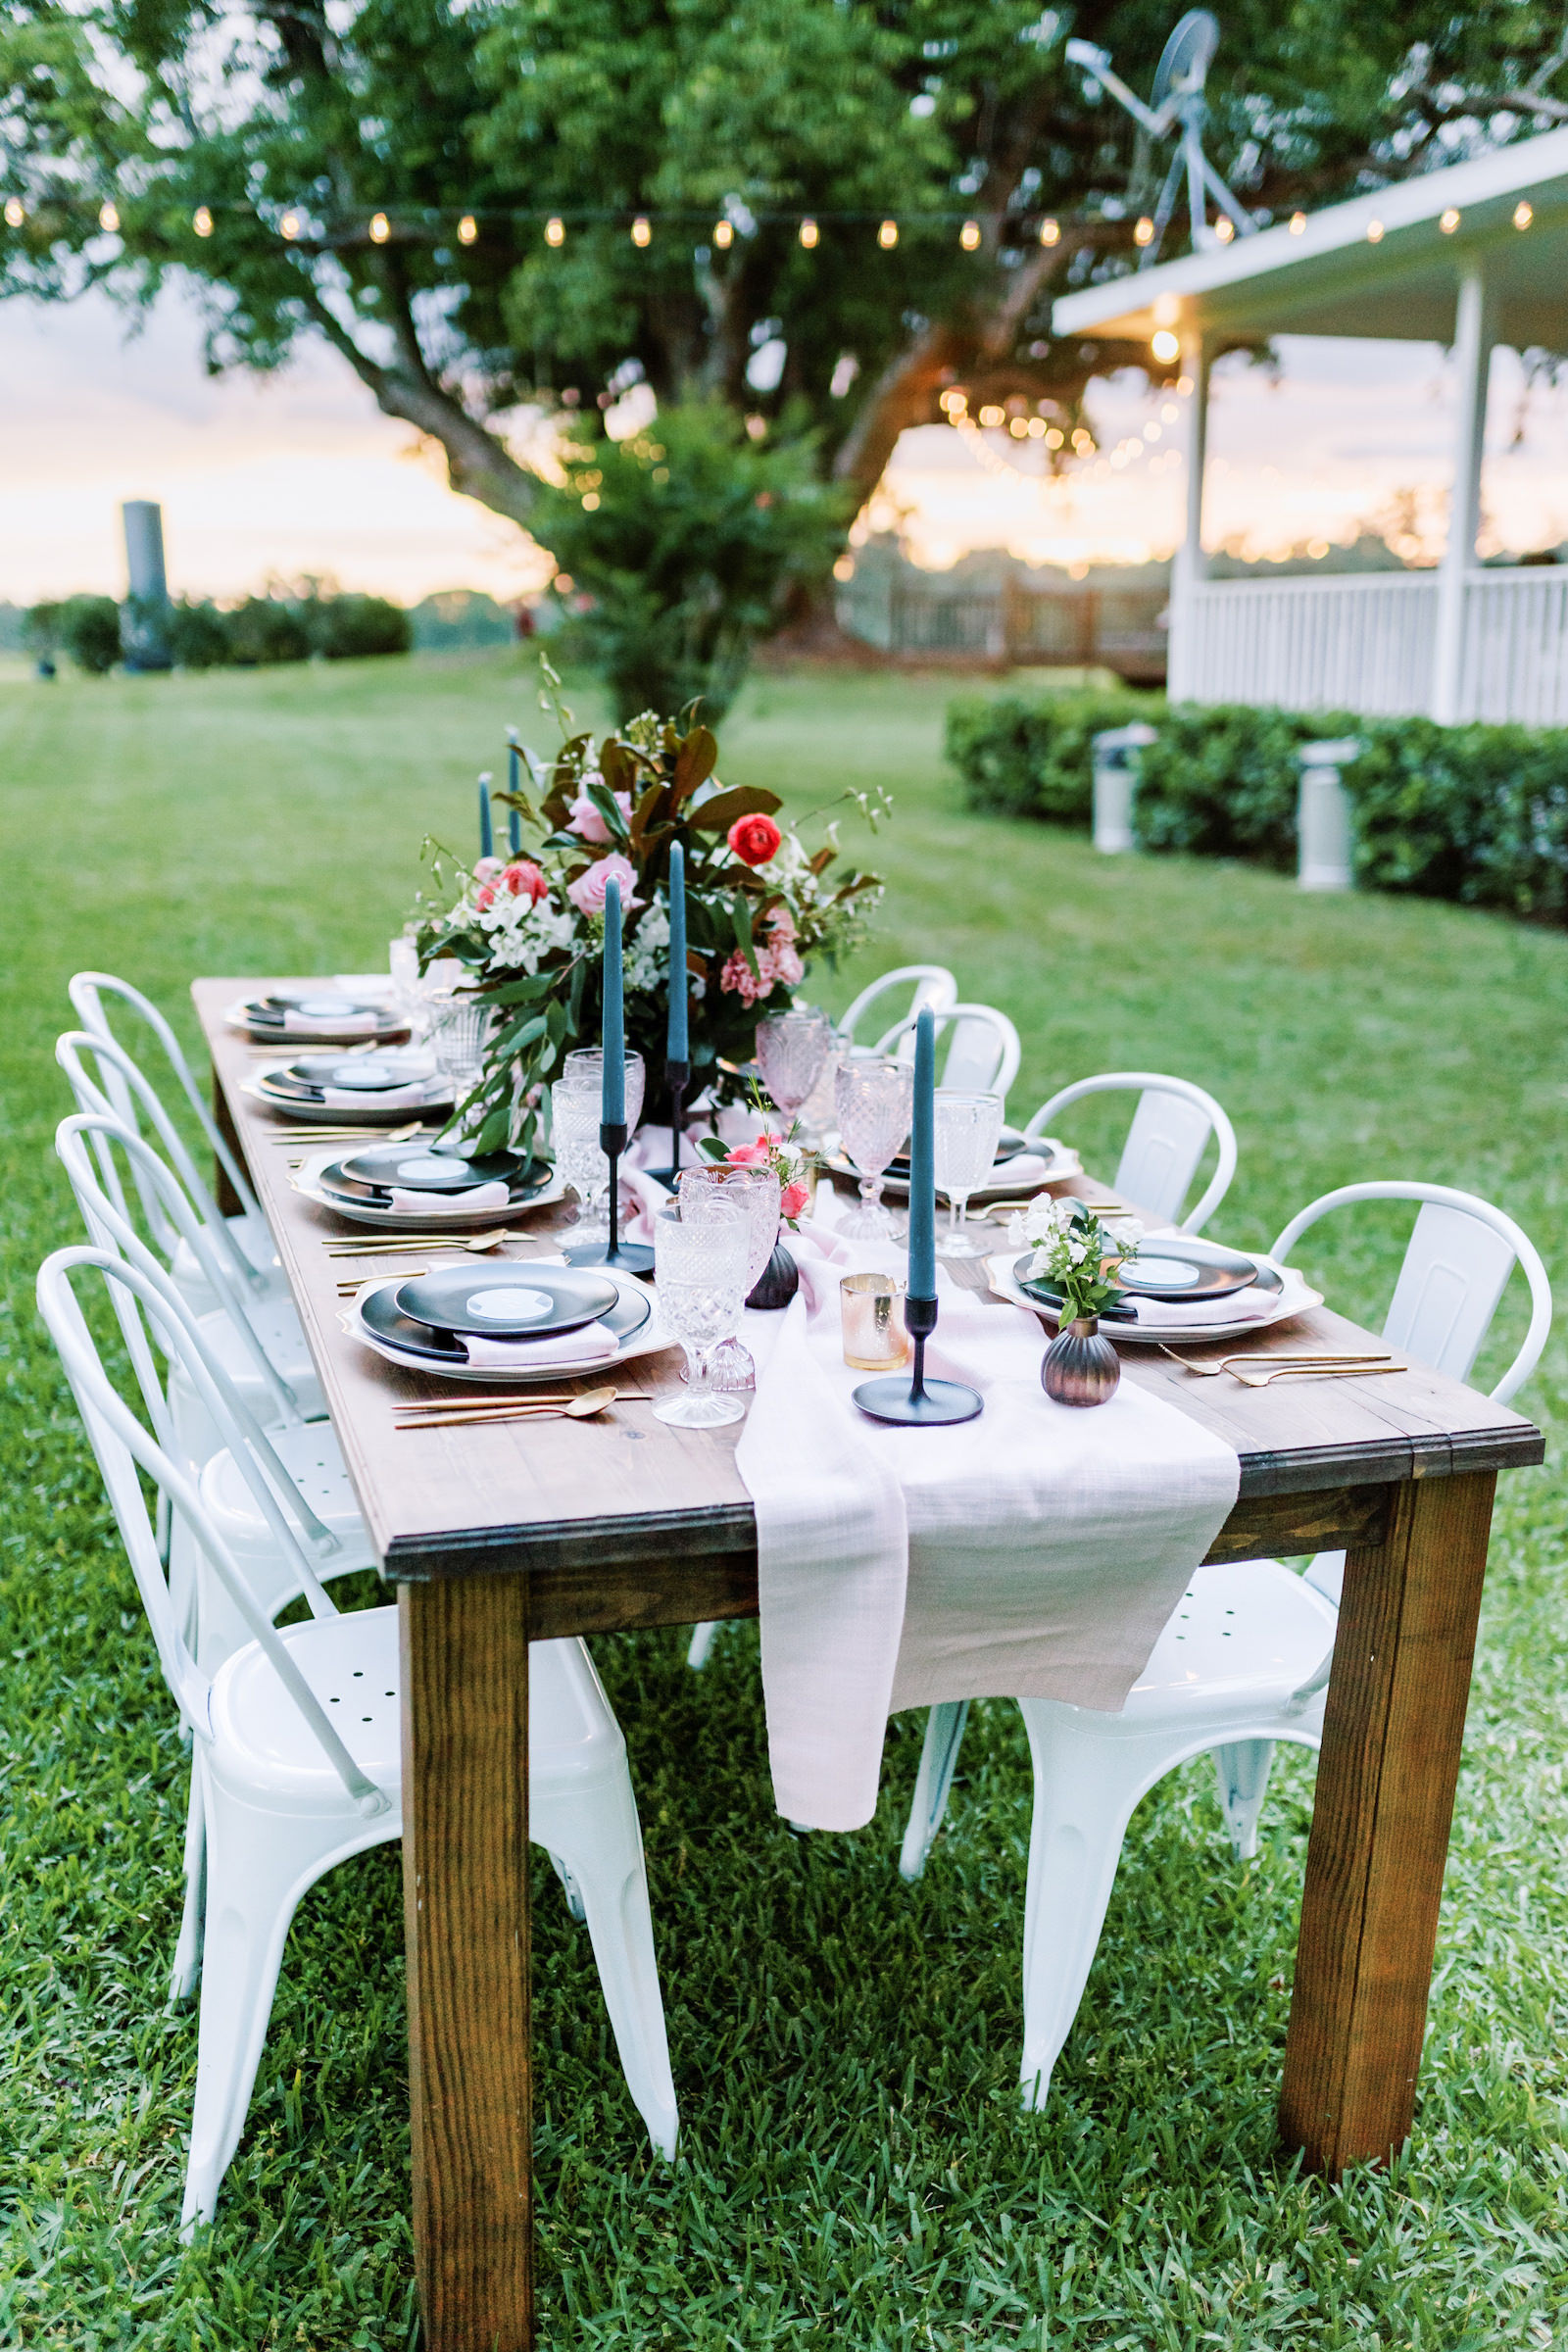 Southern Elegant Inspired Florida Outdoor Wedding Reception, Wood Table with Dark Blue Place Setting, Gold Flatware, Pink Burlap Linens, Multicolored Glass Goblets, Floral Centerpiece with Magnolia Leaves | Tampa Bay Wedding Planner EventFull Weddings | Florida Wedding Rentals Over The Top Linens | Two Sisters Ranch Dade City Florida